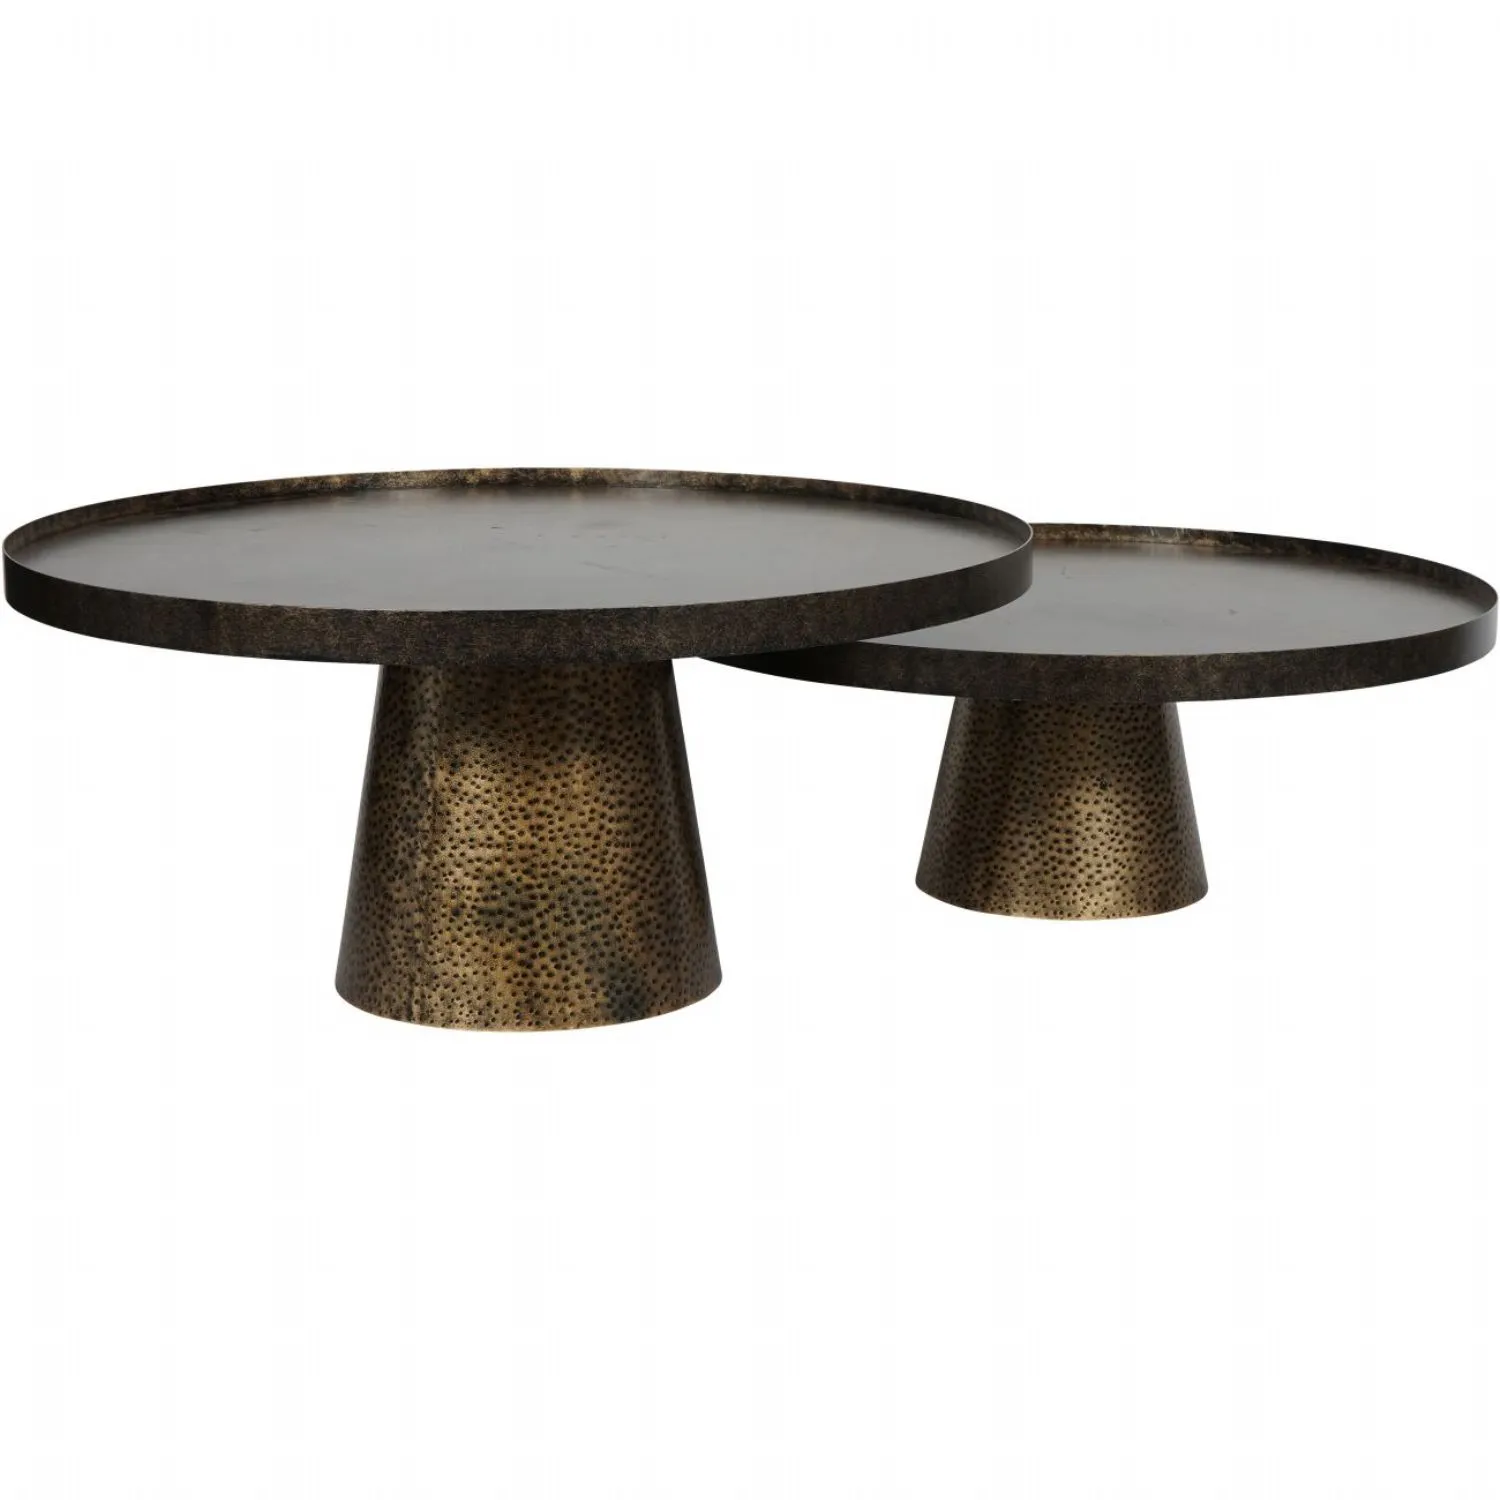 Rustic Antique Gold 2 Round Metal Coffee Tables